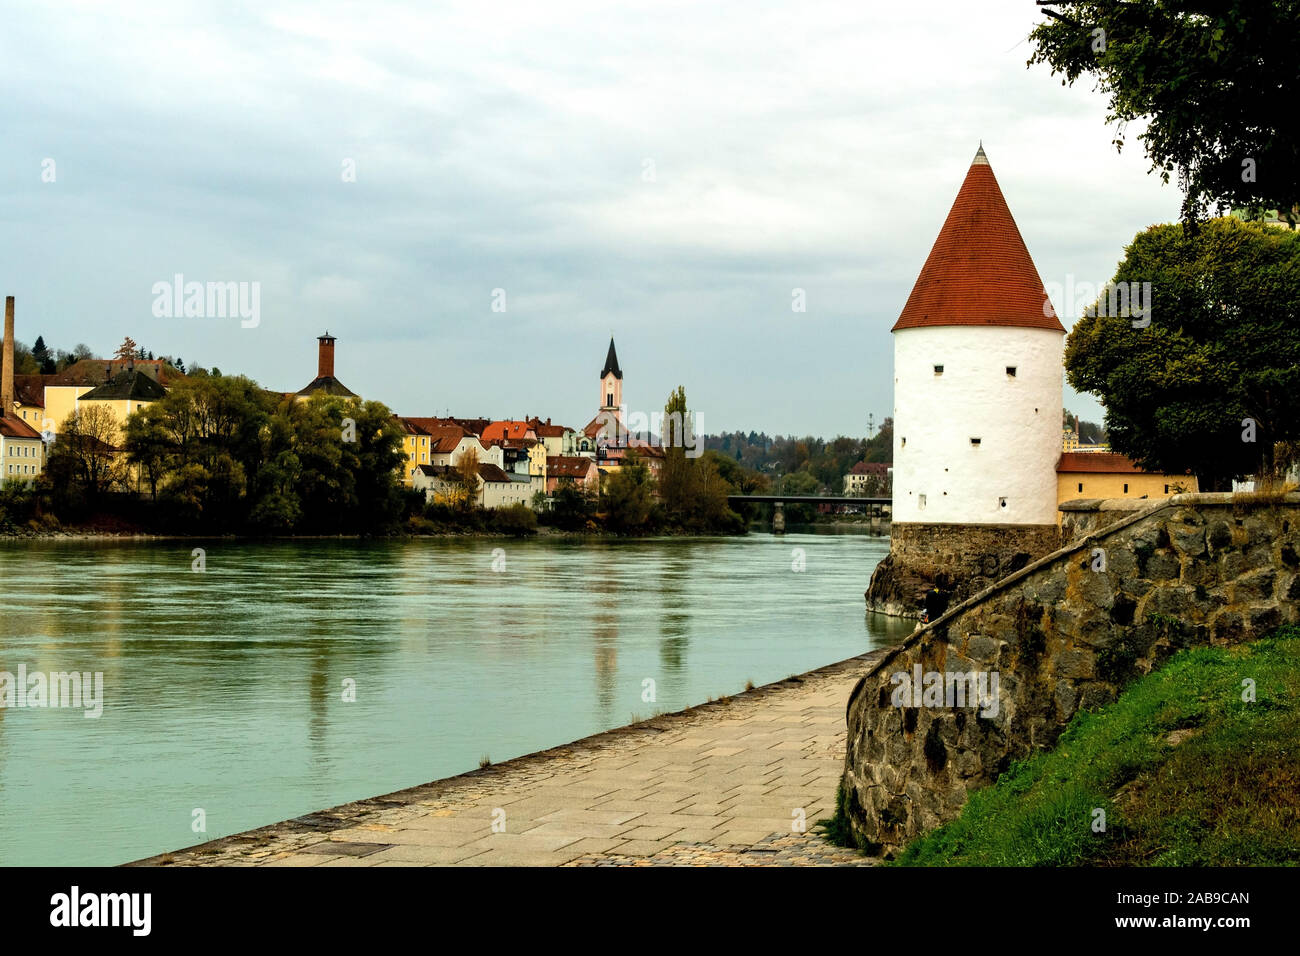 A tower overlooking the Danube rives towards the town of Anger on the northern bank of the Danube, at Passau, Germany Stock Photo